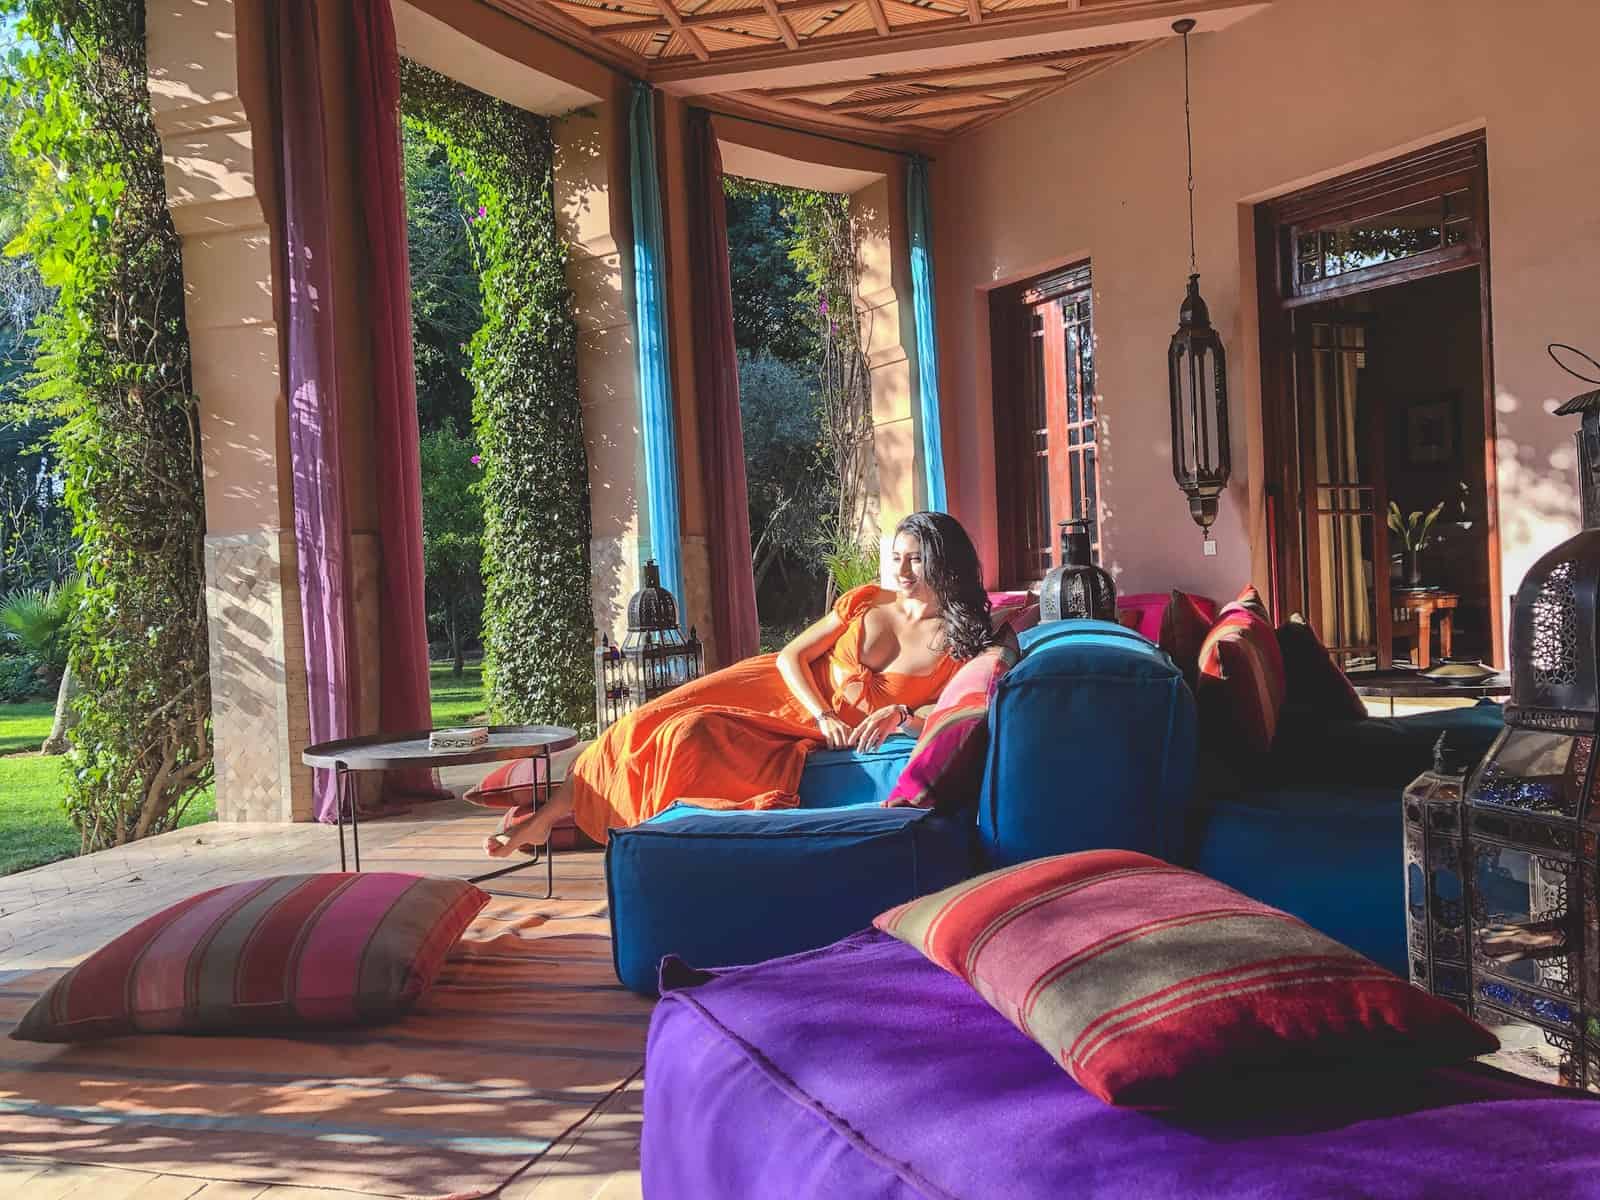 Marrakesh, Morocco: A Complete Guide to Marrakesh for (B)older Women